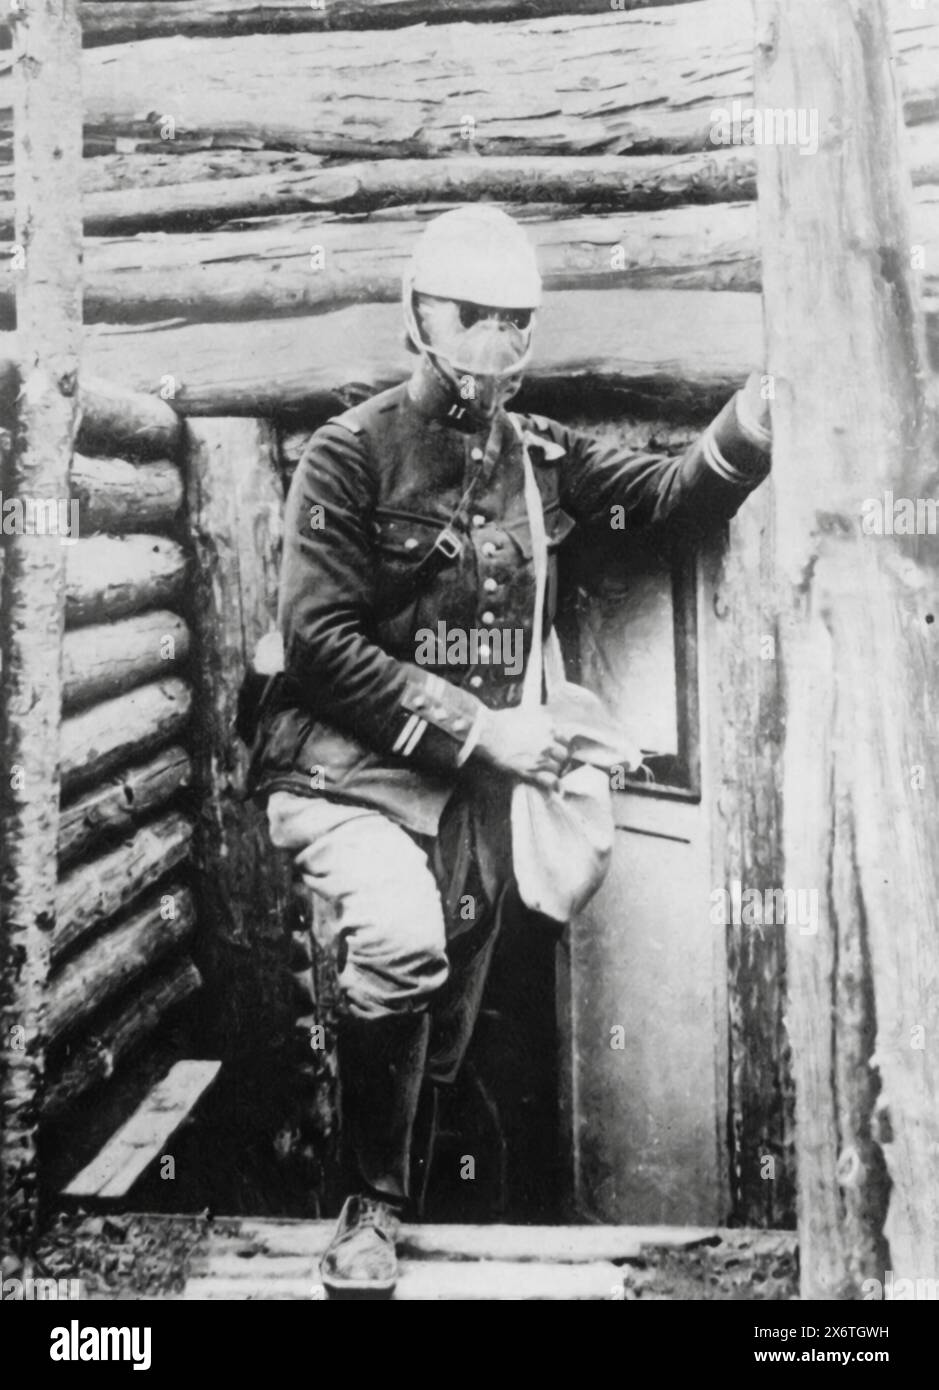 A photograph of a French bombing infantryman leaving his shelter in a trench, taken during the First World War, circa 1915. He is shown with a mask and a satchel, likely containing explosives. This image highlights the dangerous role of bombing infantrymen and the hazardous environment of trench warfare. Stock Photo